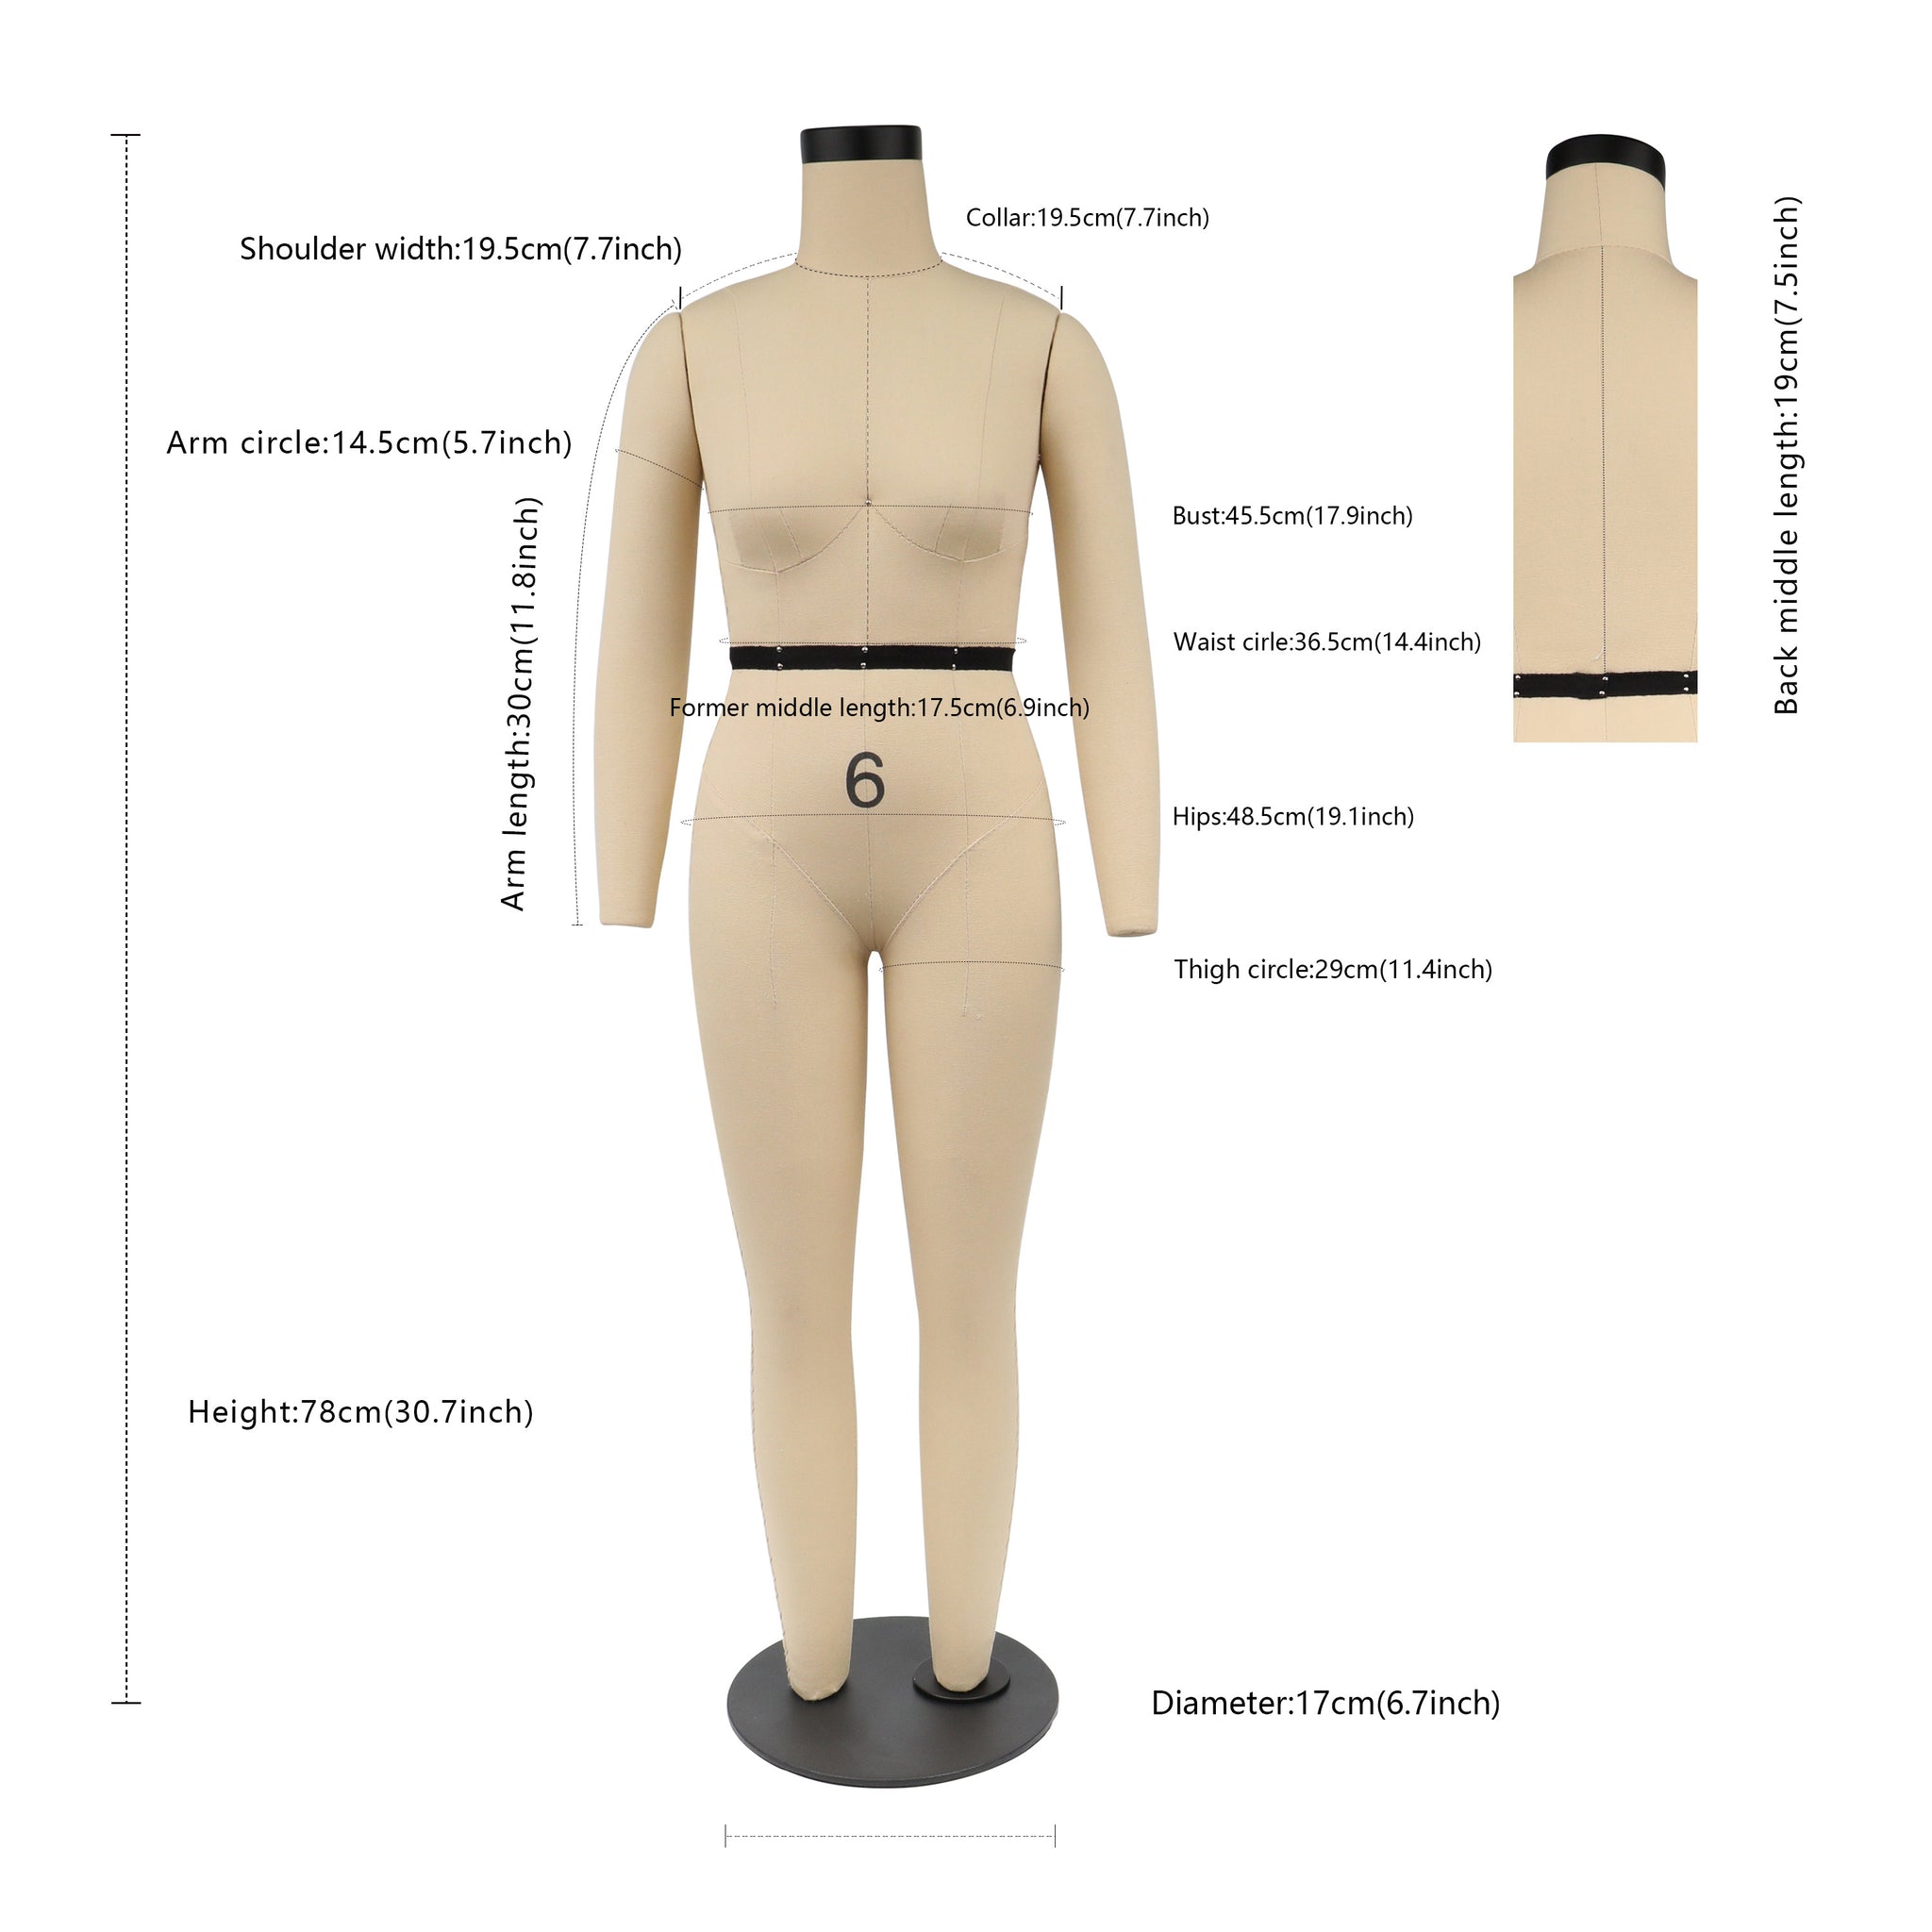 Measurements of dress forms (in cm)